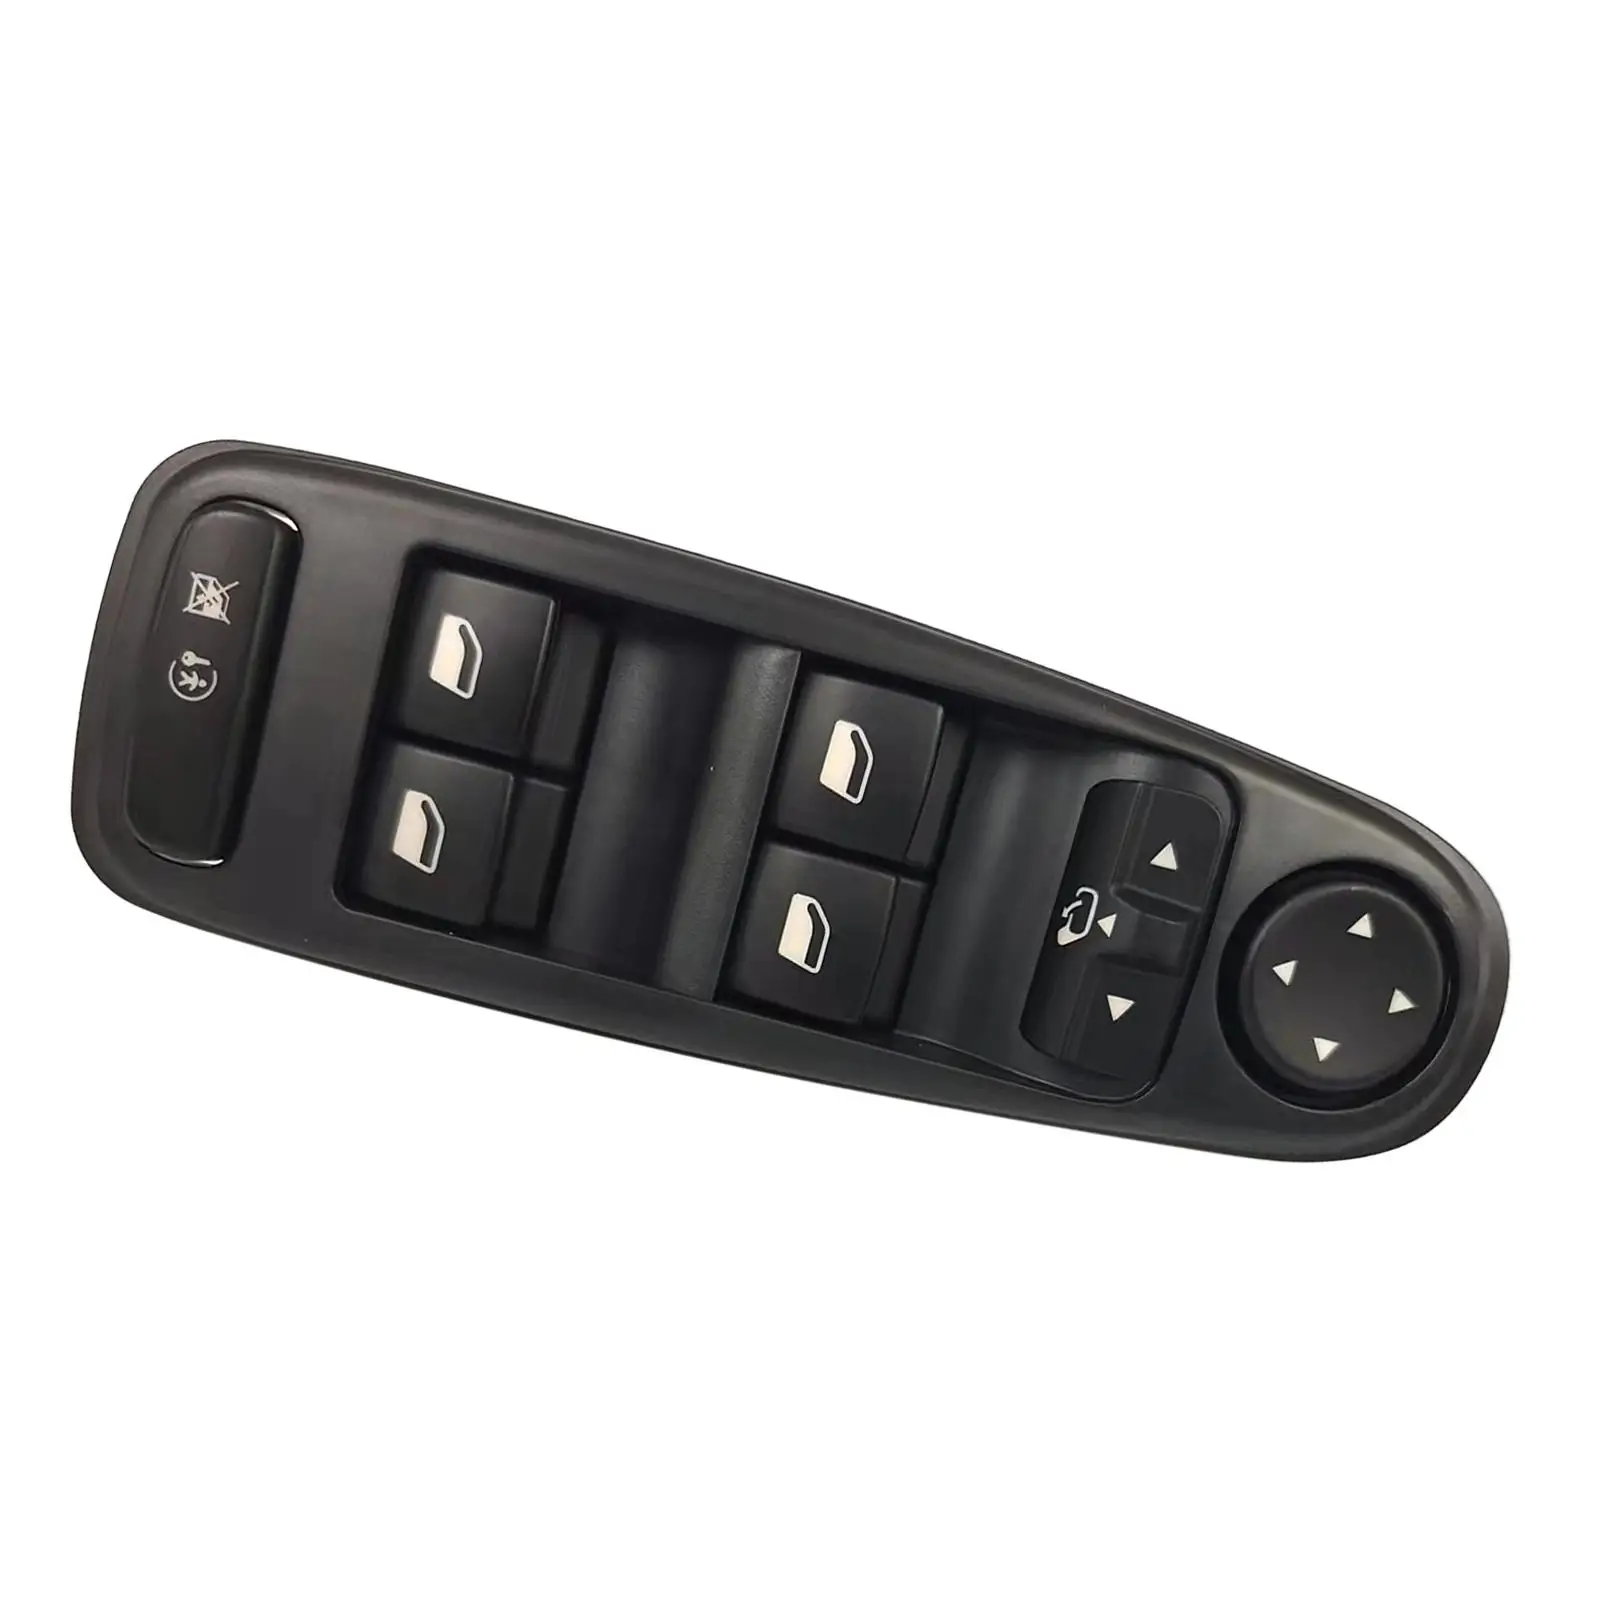 6554.YH, Sturdy Master Window Switch Abrasion Resistant for Car Accessory